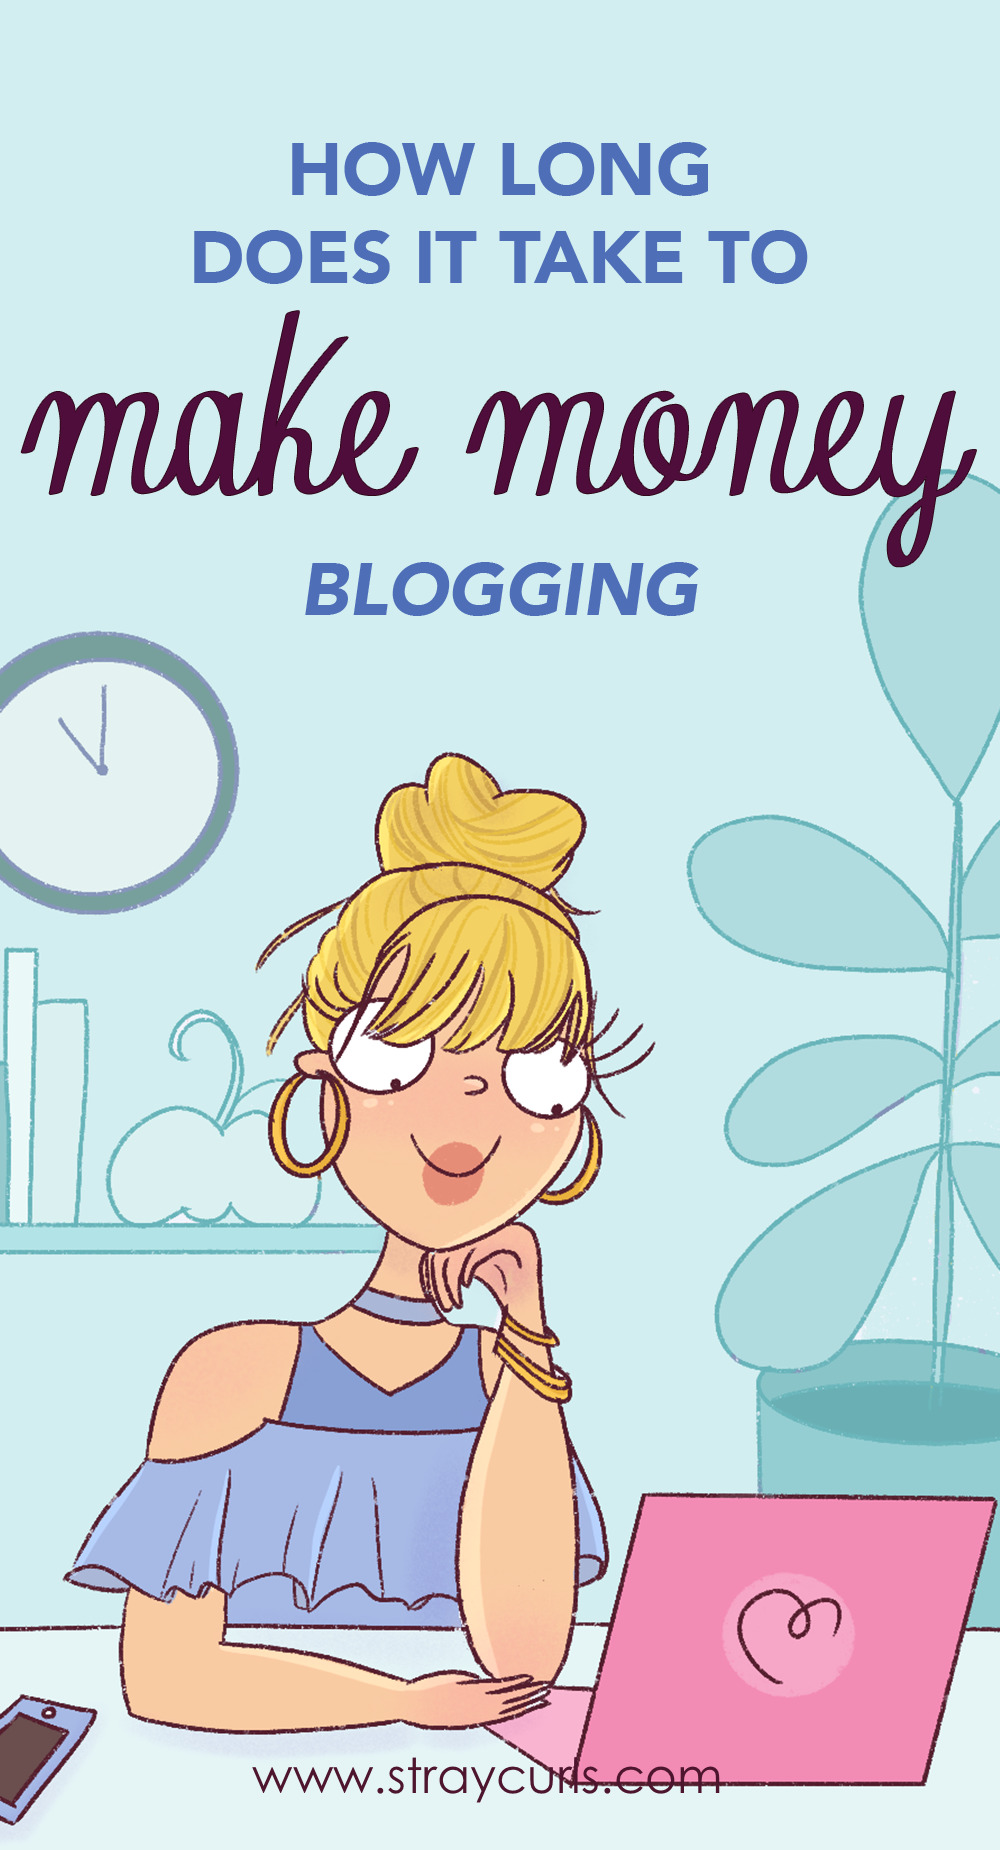 How long does it take to make money blogging? This post will tell you everything you need to know to start and grow a blog so you can make money blogging right away!